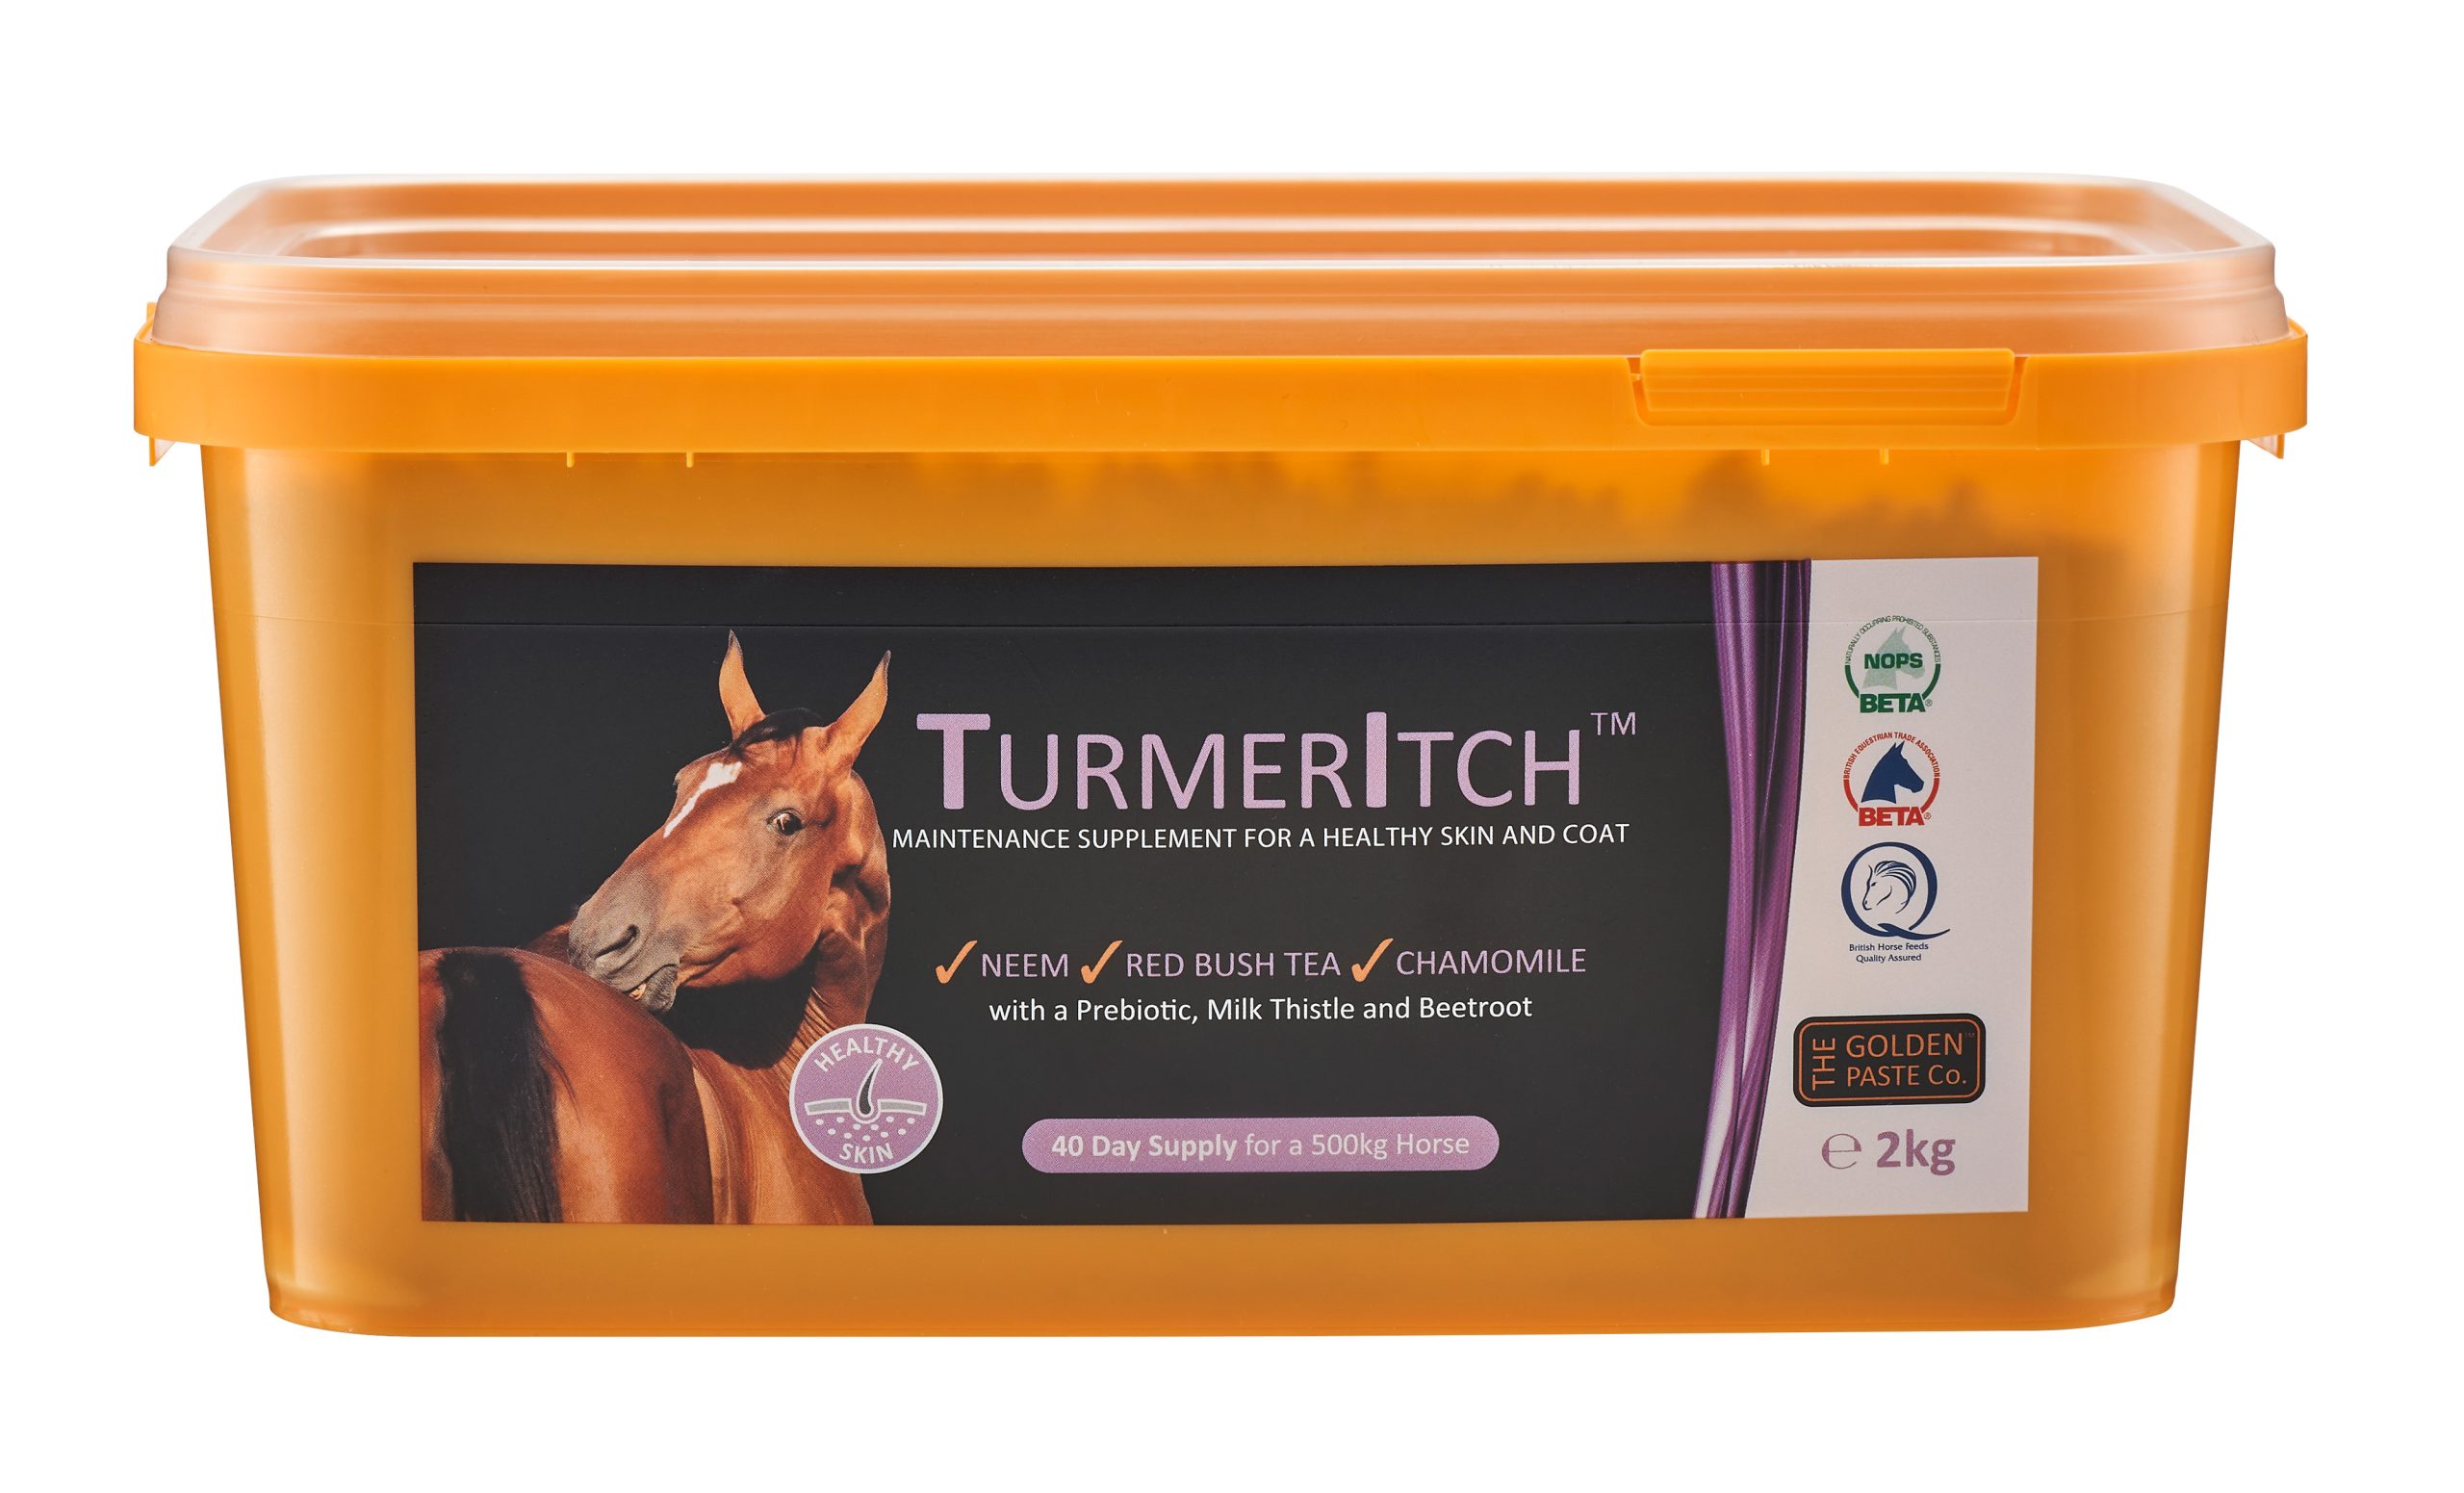 TurmerItch from The Golden Paste Company